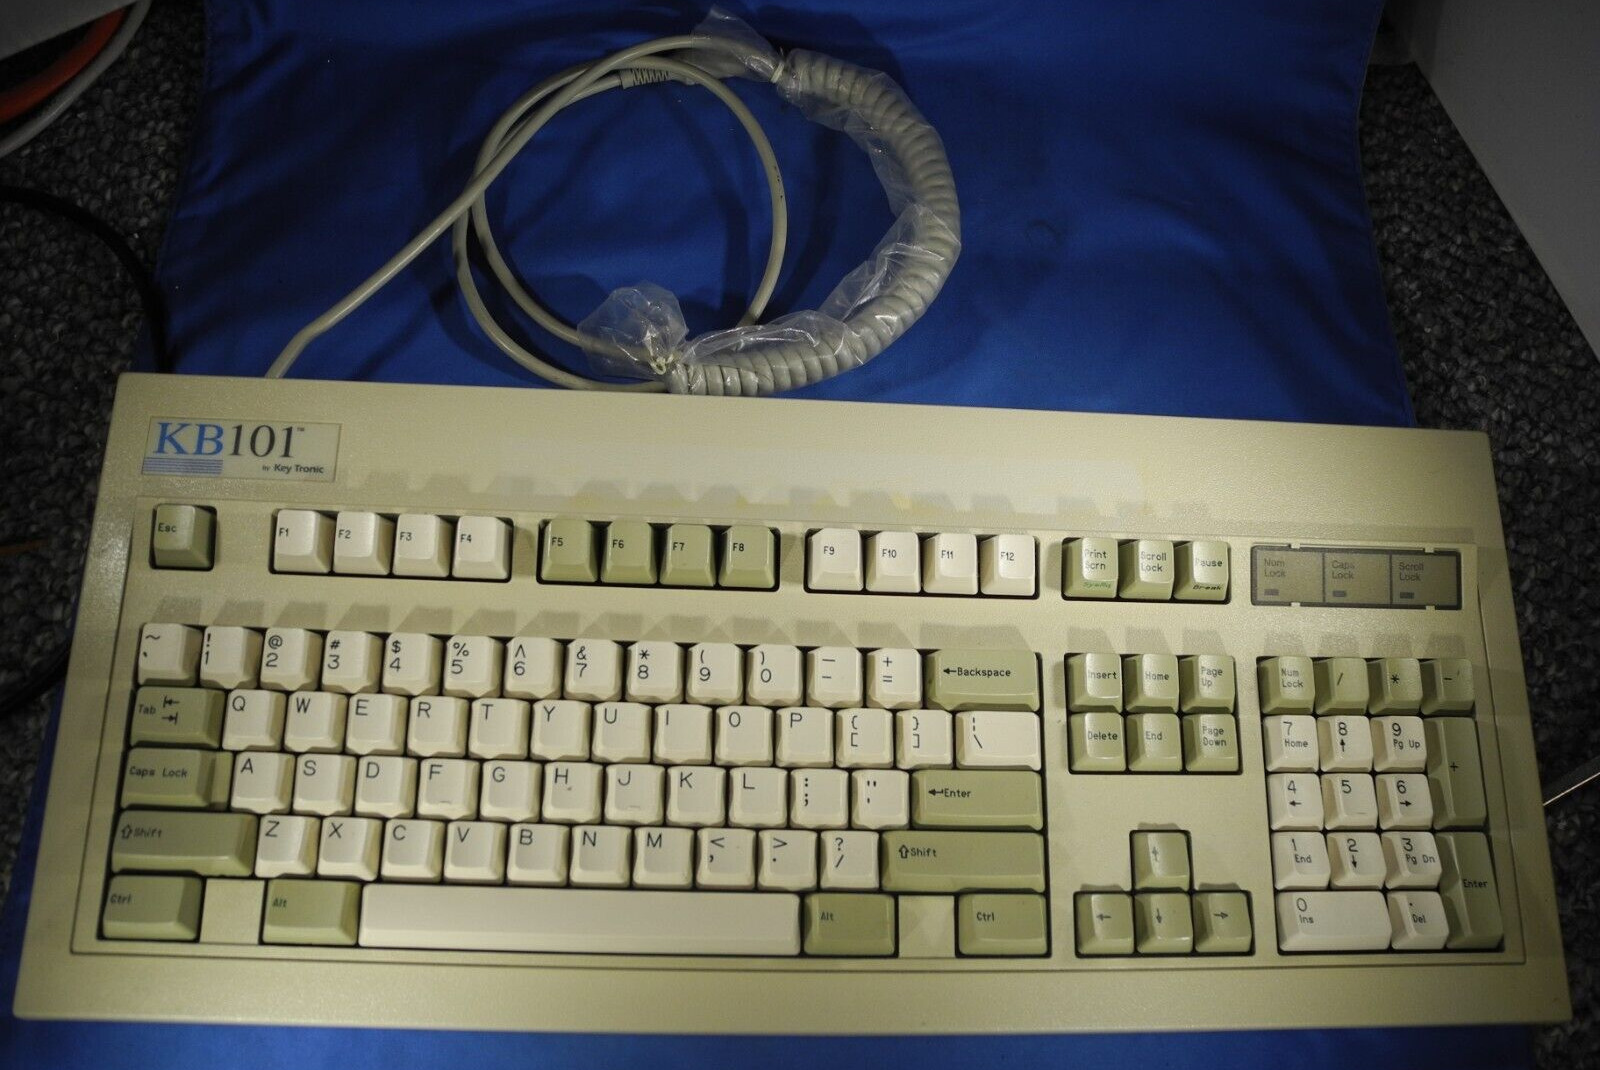 KB101 by Key Tronic Keyboard for pc,xt,at Rare Vintage (VERY NICE)